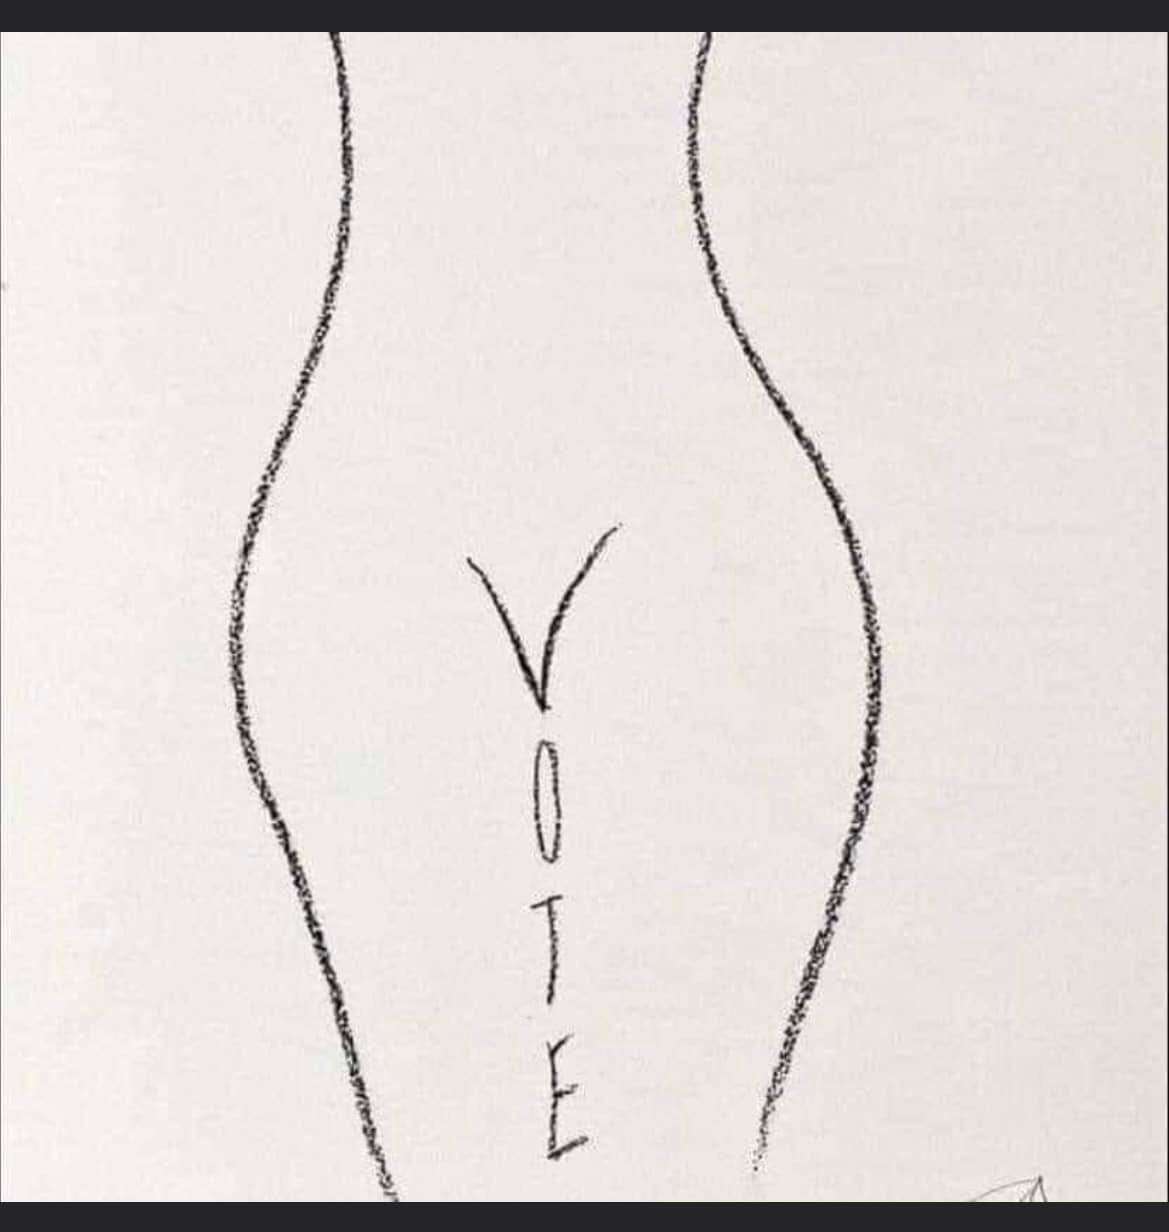 outline of a woman's body in which the lines between the legs spell out 'vote' -- with the 'v' at the vagina